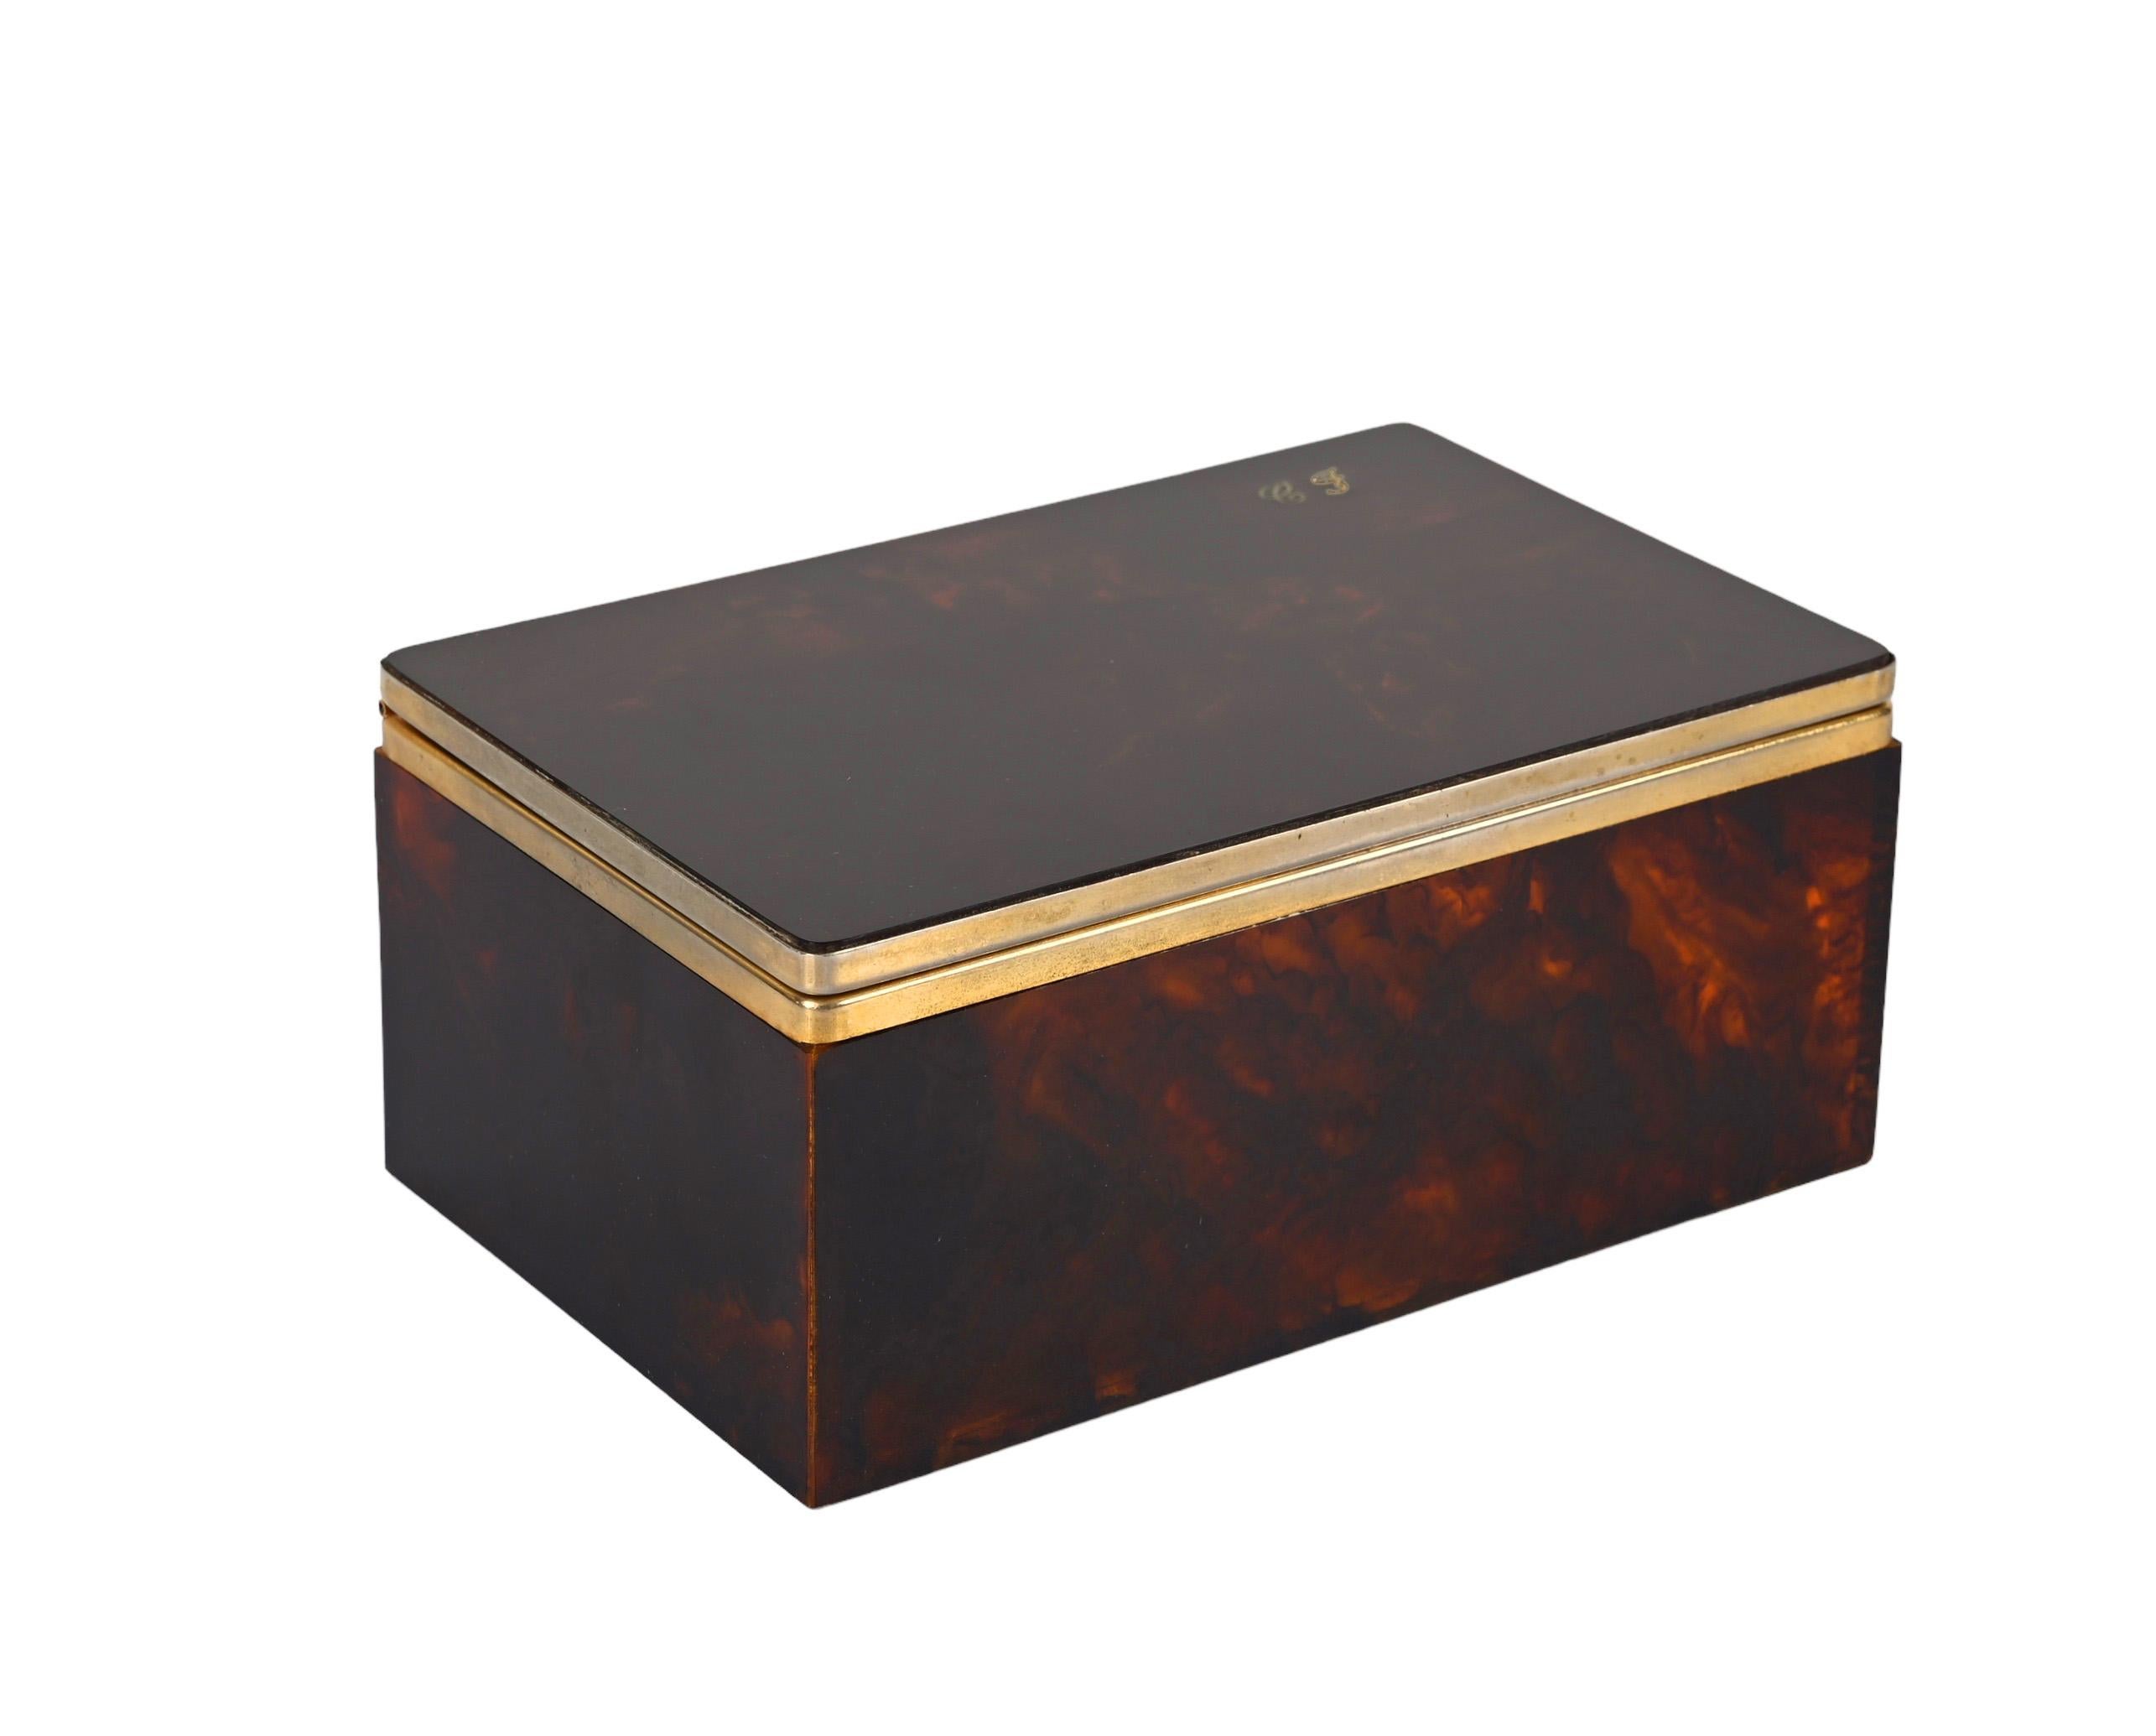 Amazing mid-century lucite and brass decorative jewelry box. This fantastic piece was designed in Italy during the 1970s for Christian Dior.

This piece, is in its unique elegance, simulates tortoiseshell with its lucite structure and has precious